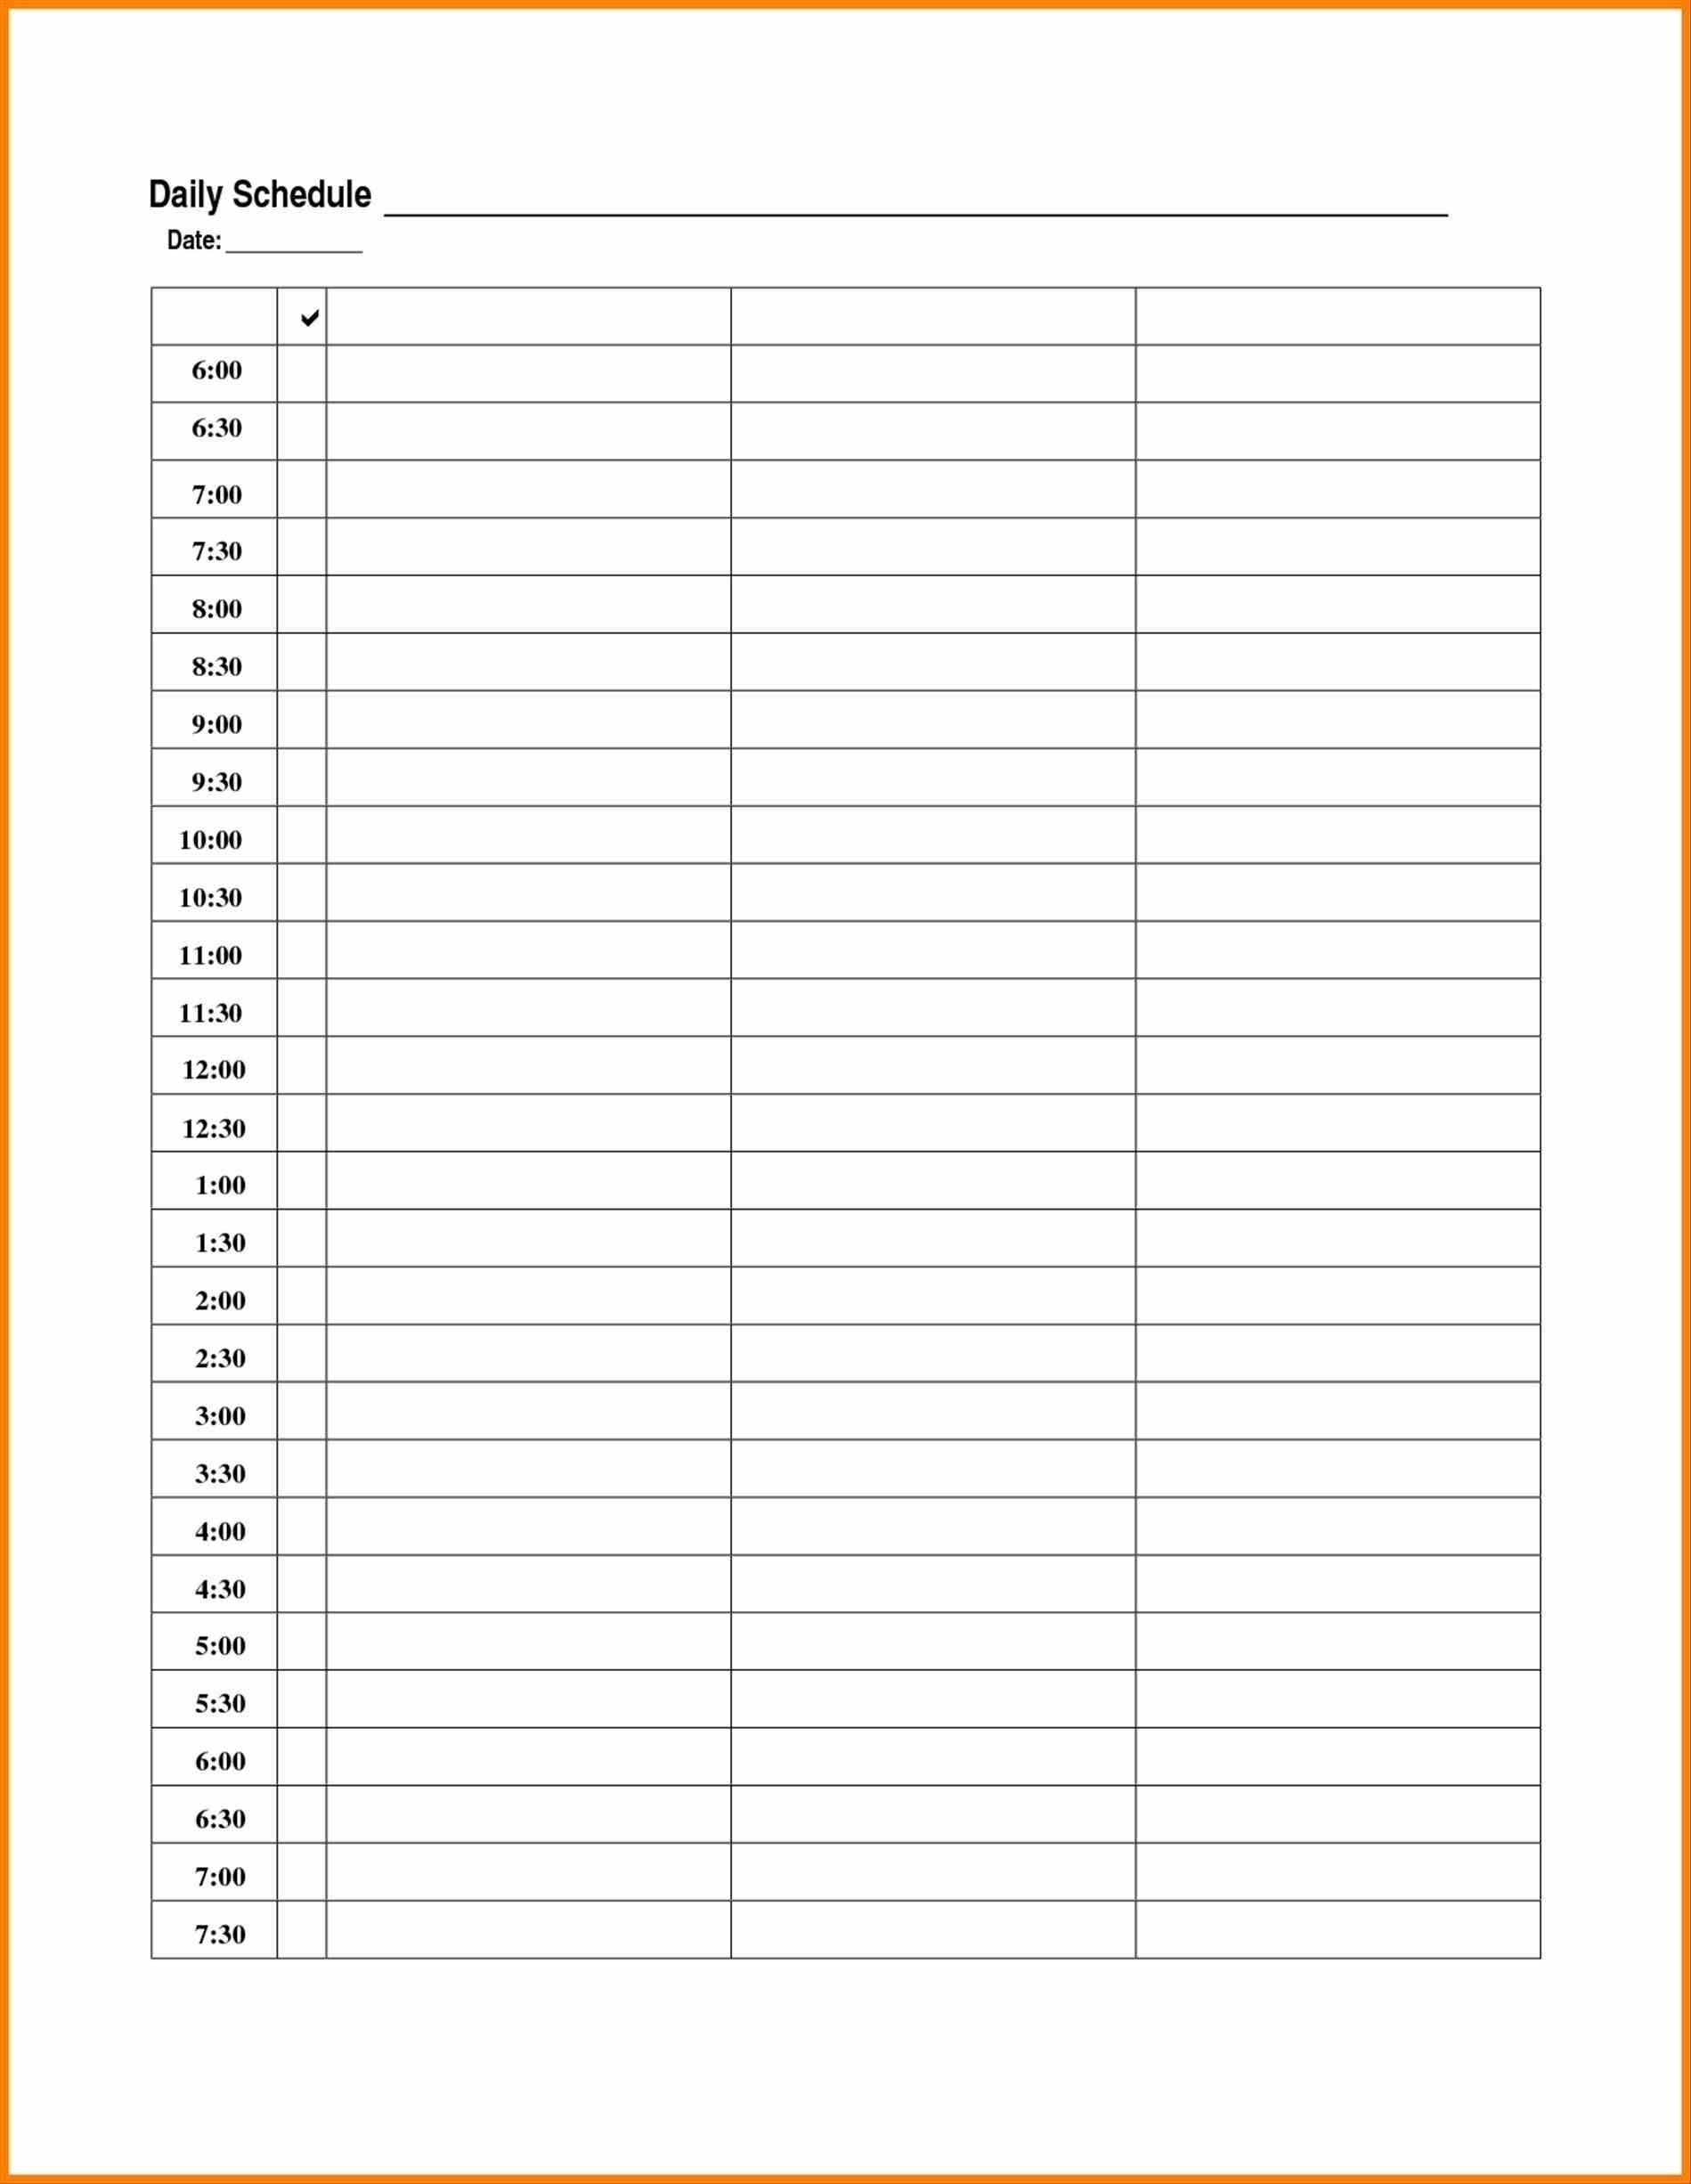 026 Free Daily Calendar Template Printable With Time Slots with regard to Daily Calendar With Time Slots